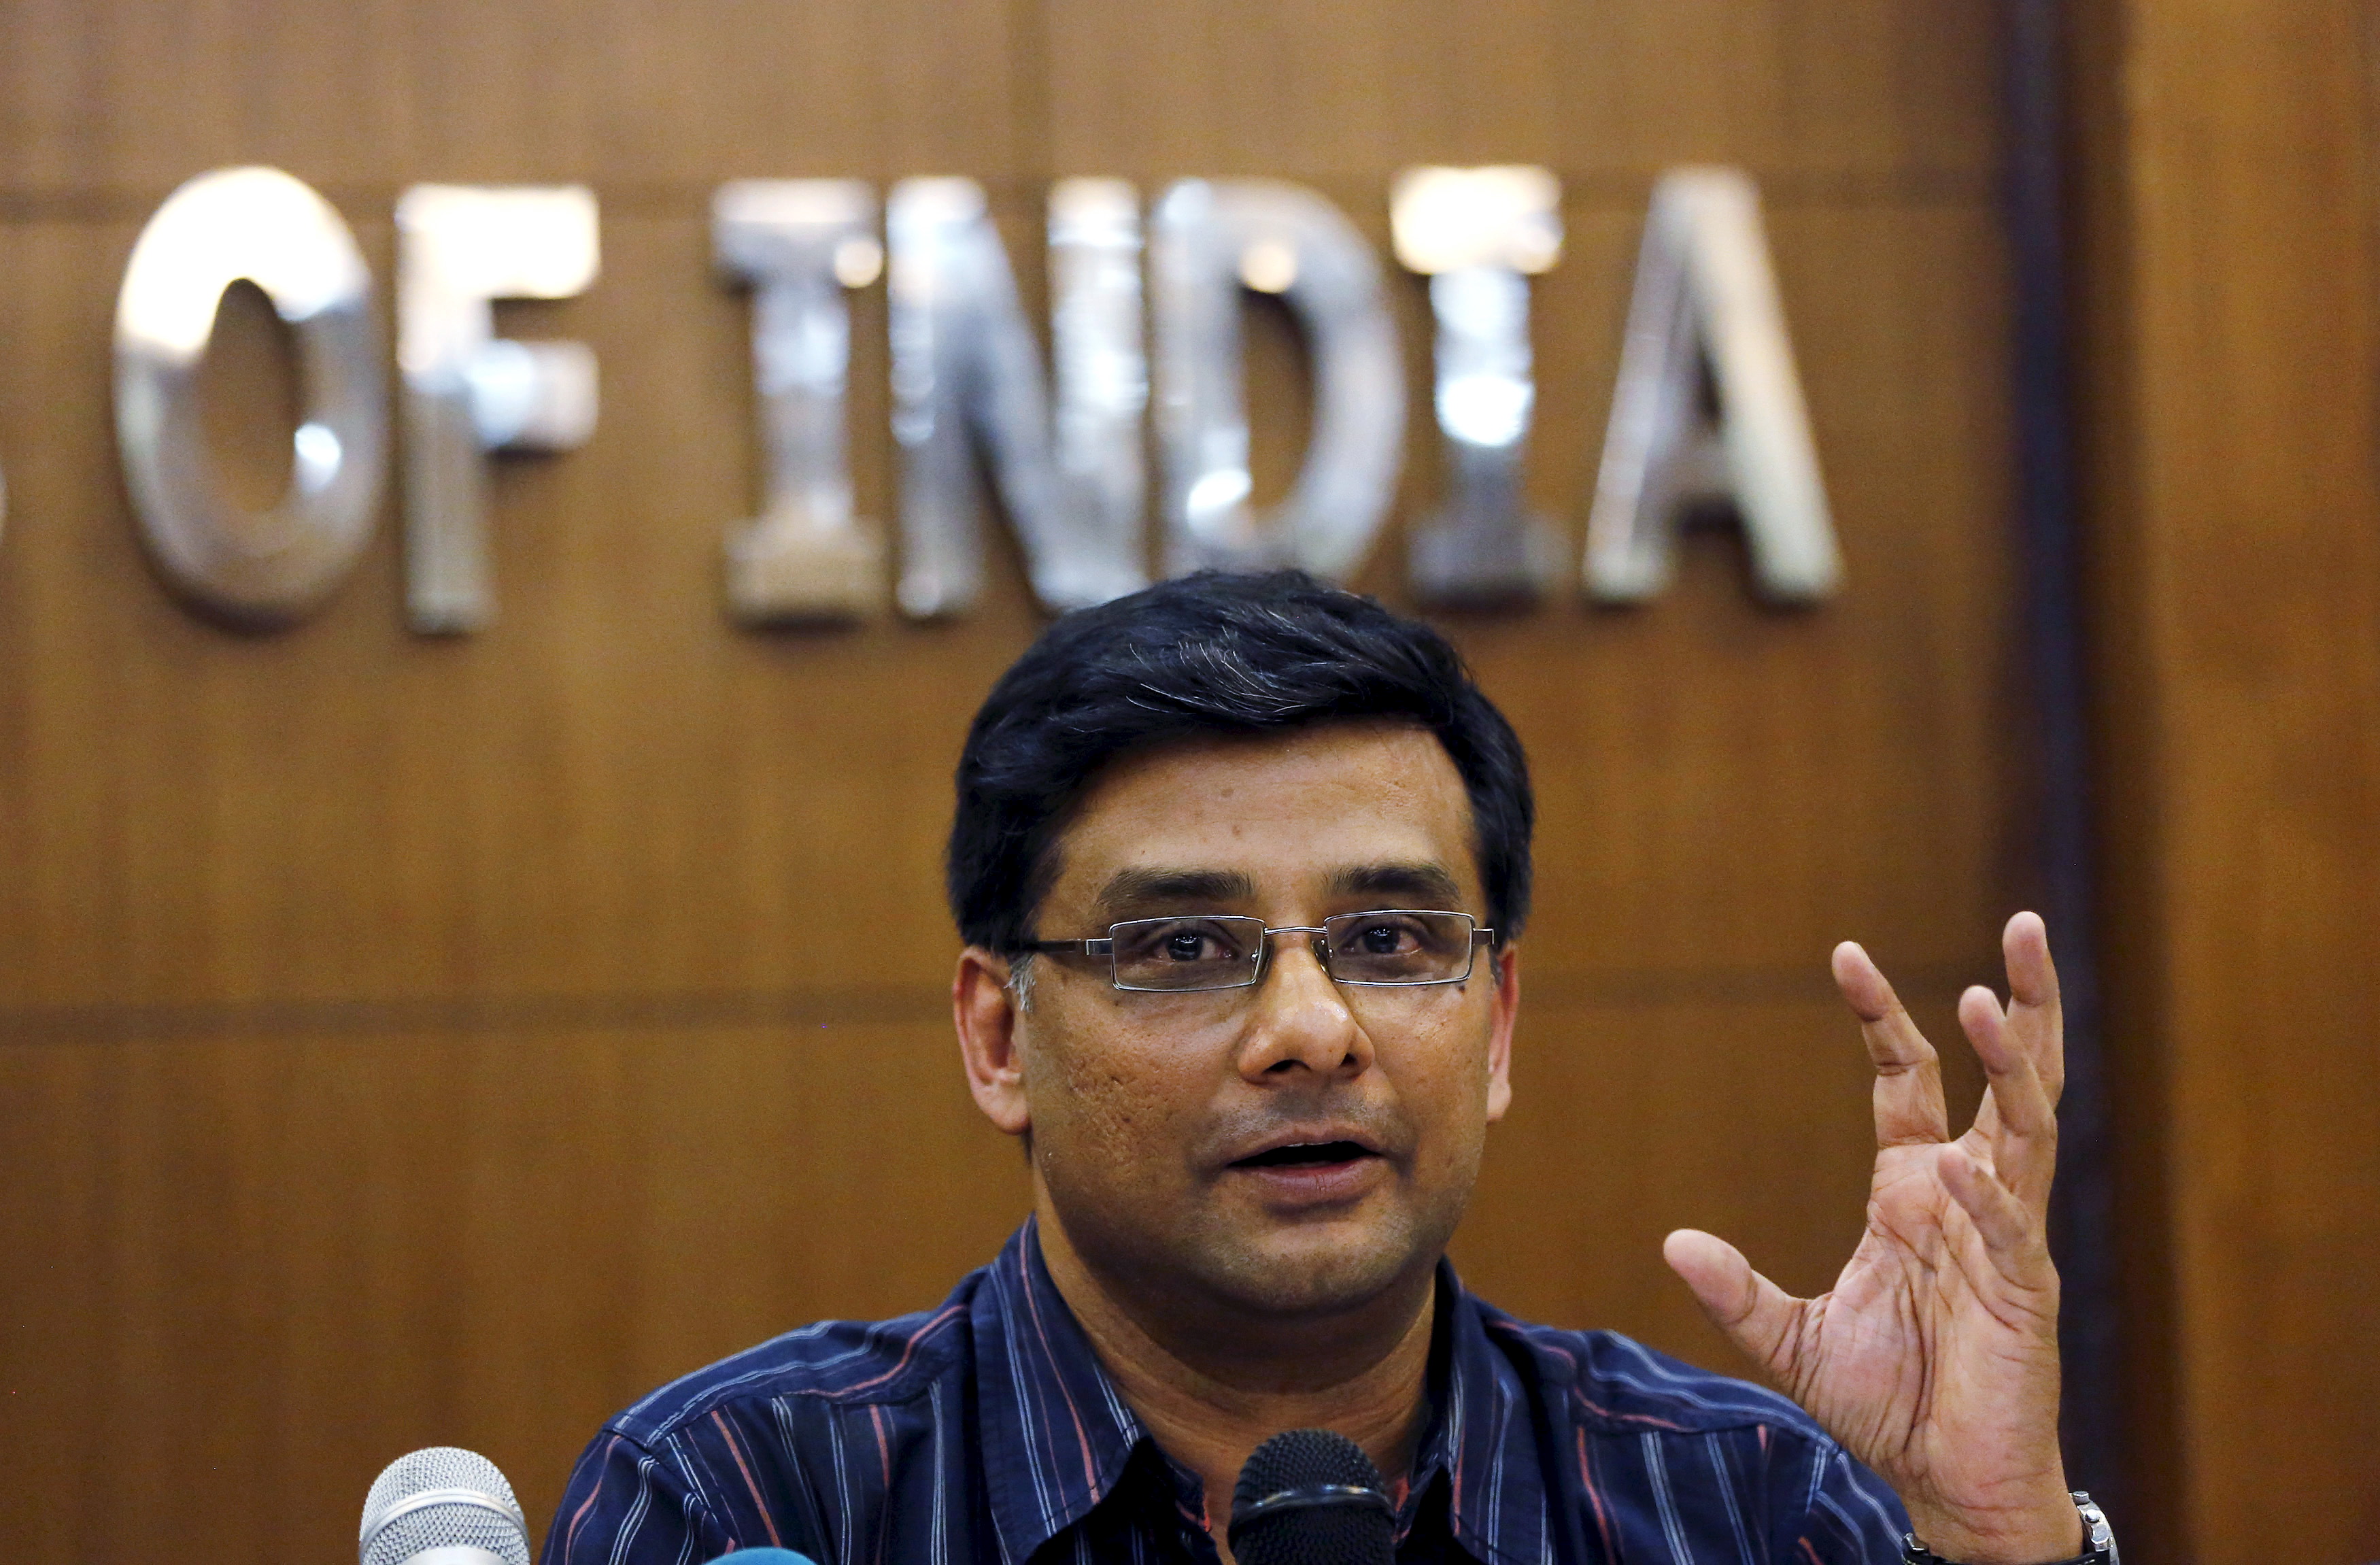 Samit Aich, executive director of Greenpeace India, gestures as he addresses the media during a news conference in New Delhi, India, May 21, 2015 (Adnan Abidi—Reuters)